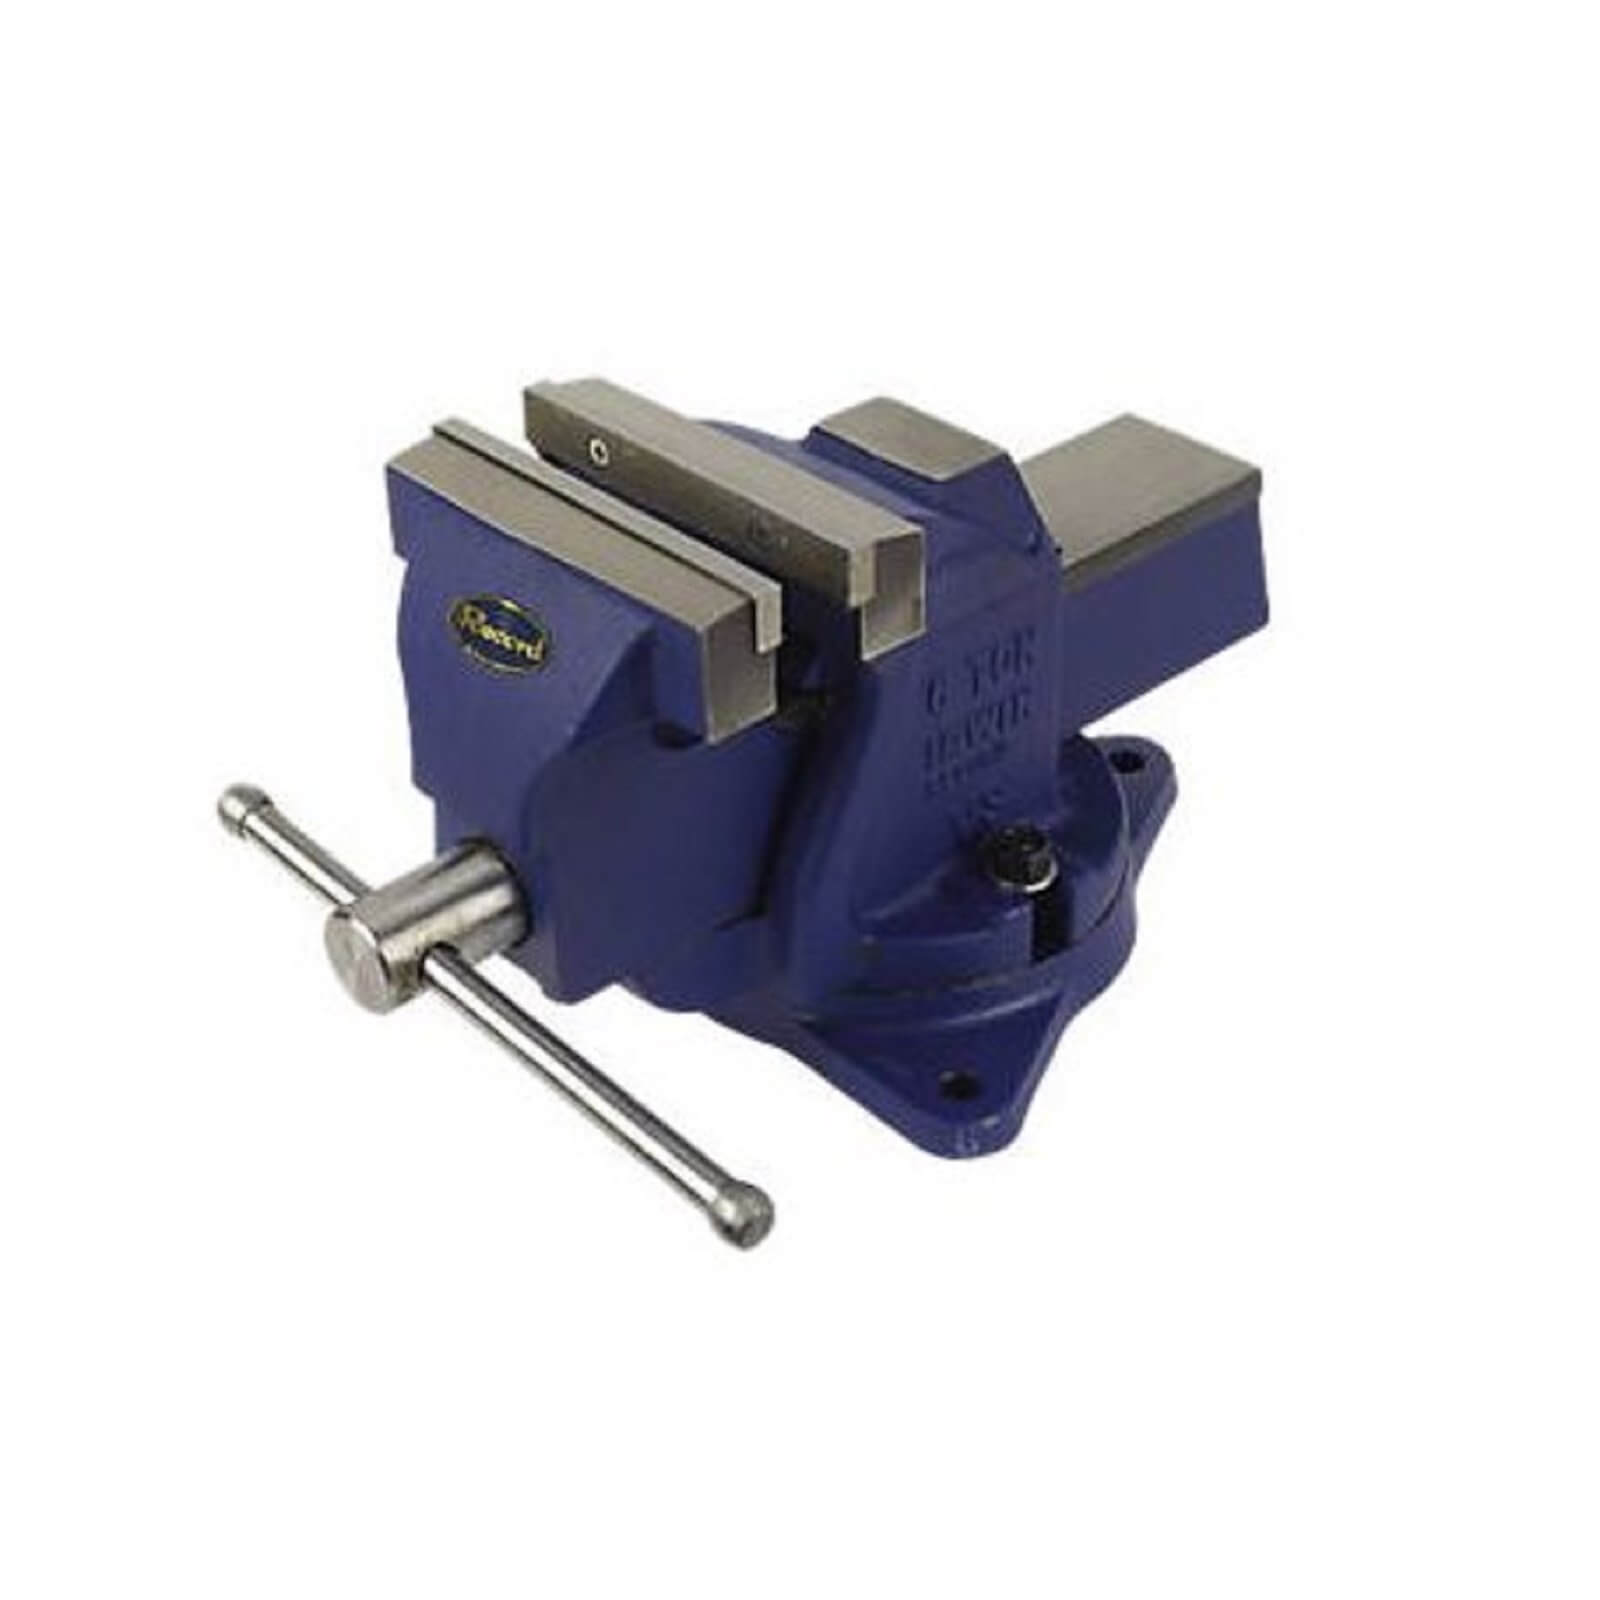 Photo of Irwin Record Workshop Vice With Swivel - 100mm 4in